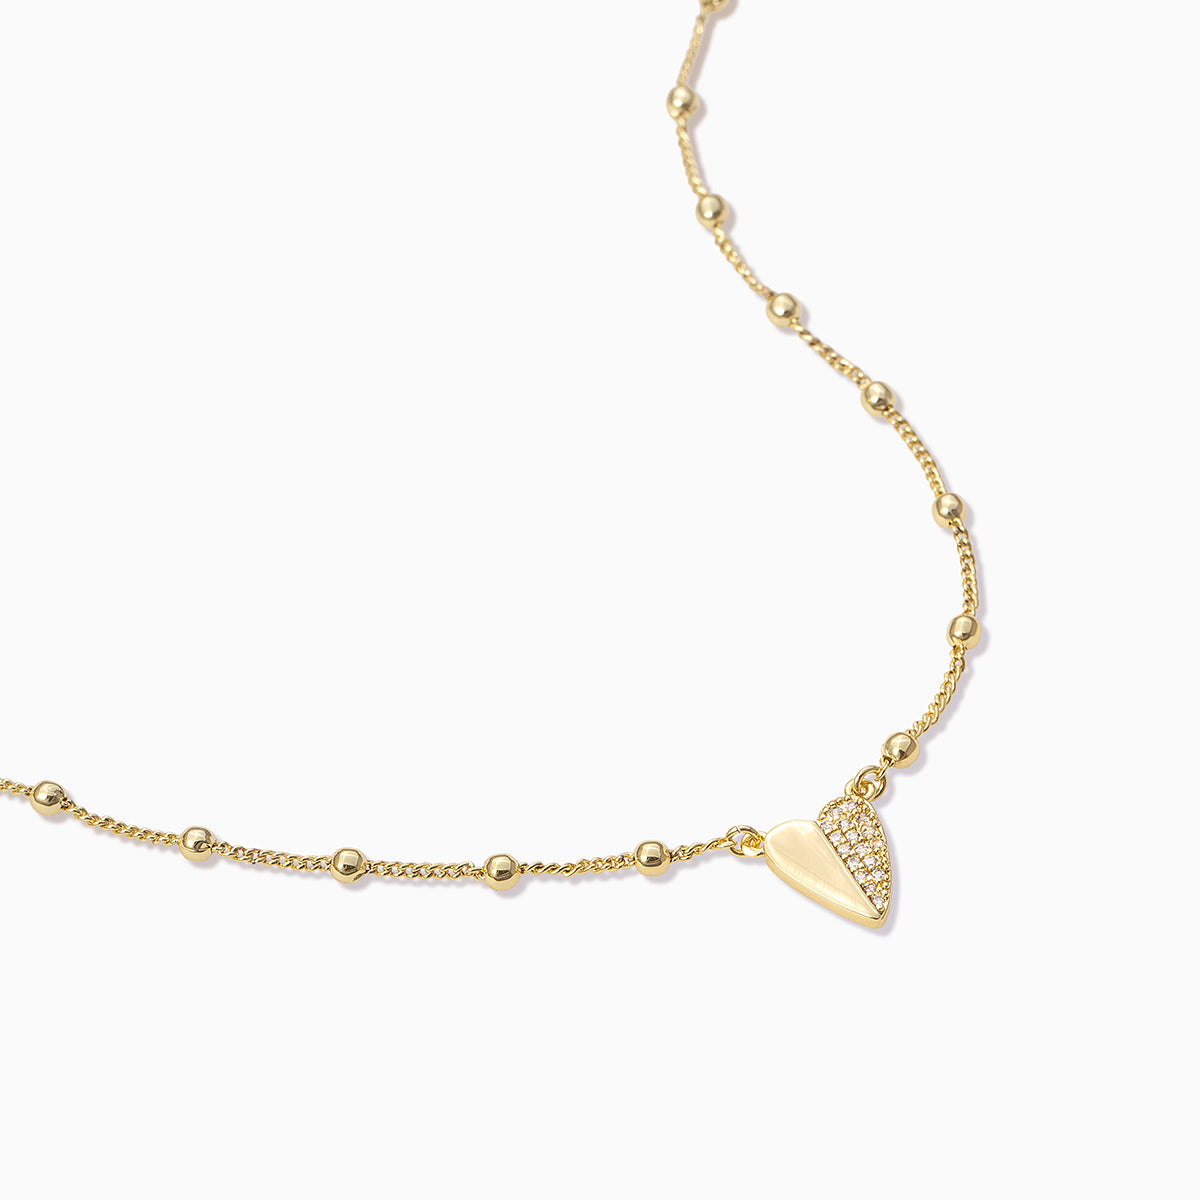 Other Half Heart Necklace | Gold | Product Detail Image | Uncommon James